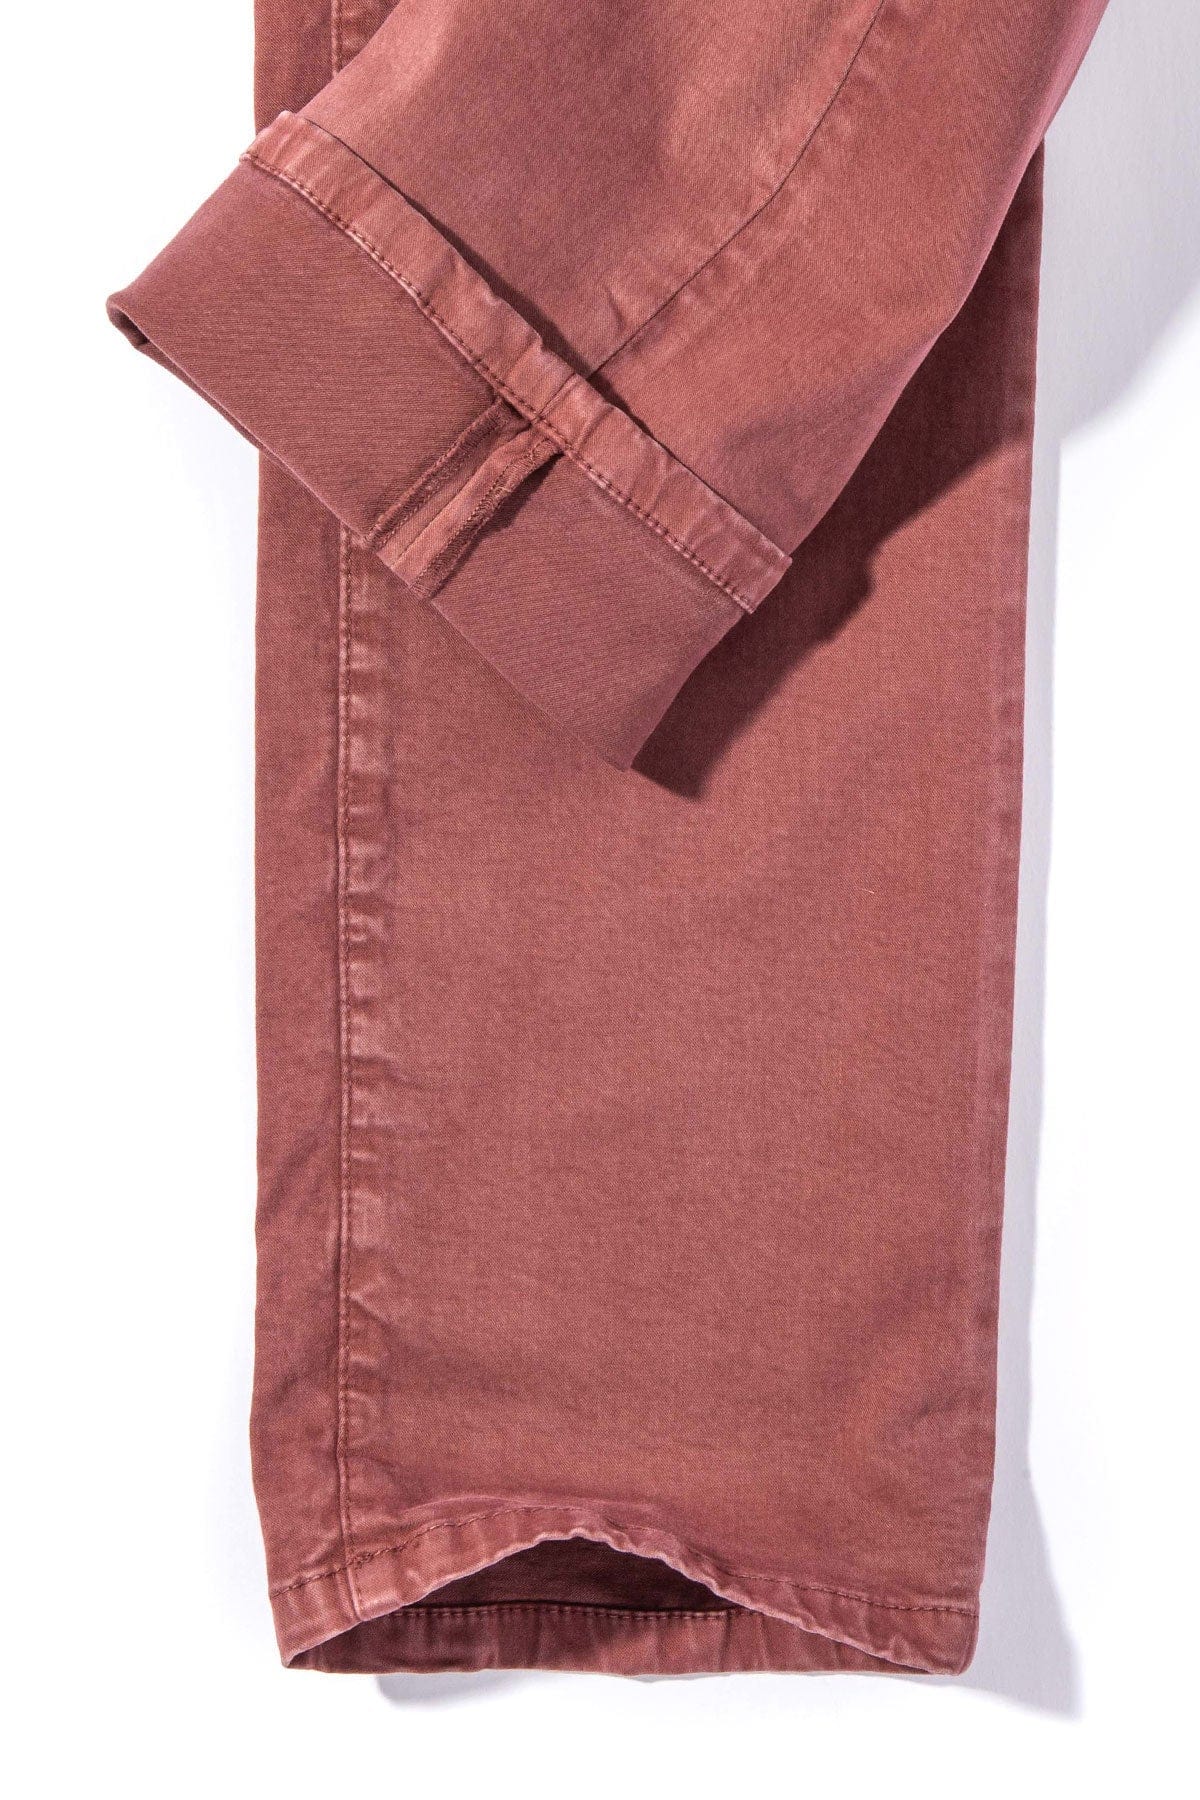 Ryland Rugged Soft Touch Cotton Jeans in Arancio - AXEL'S